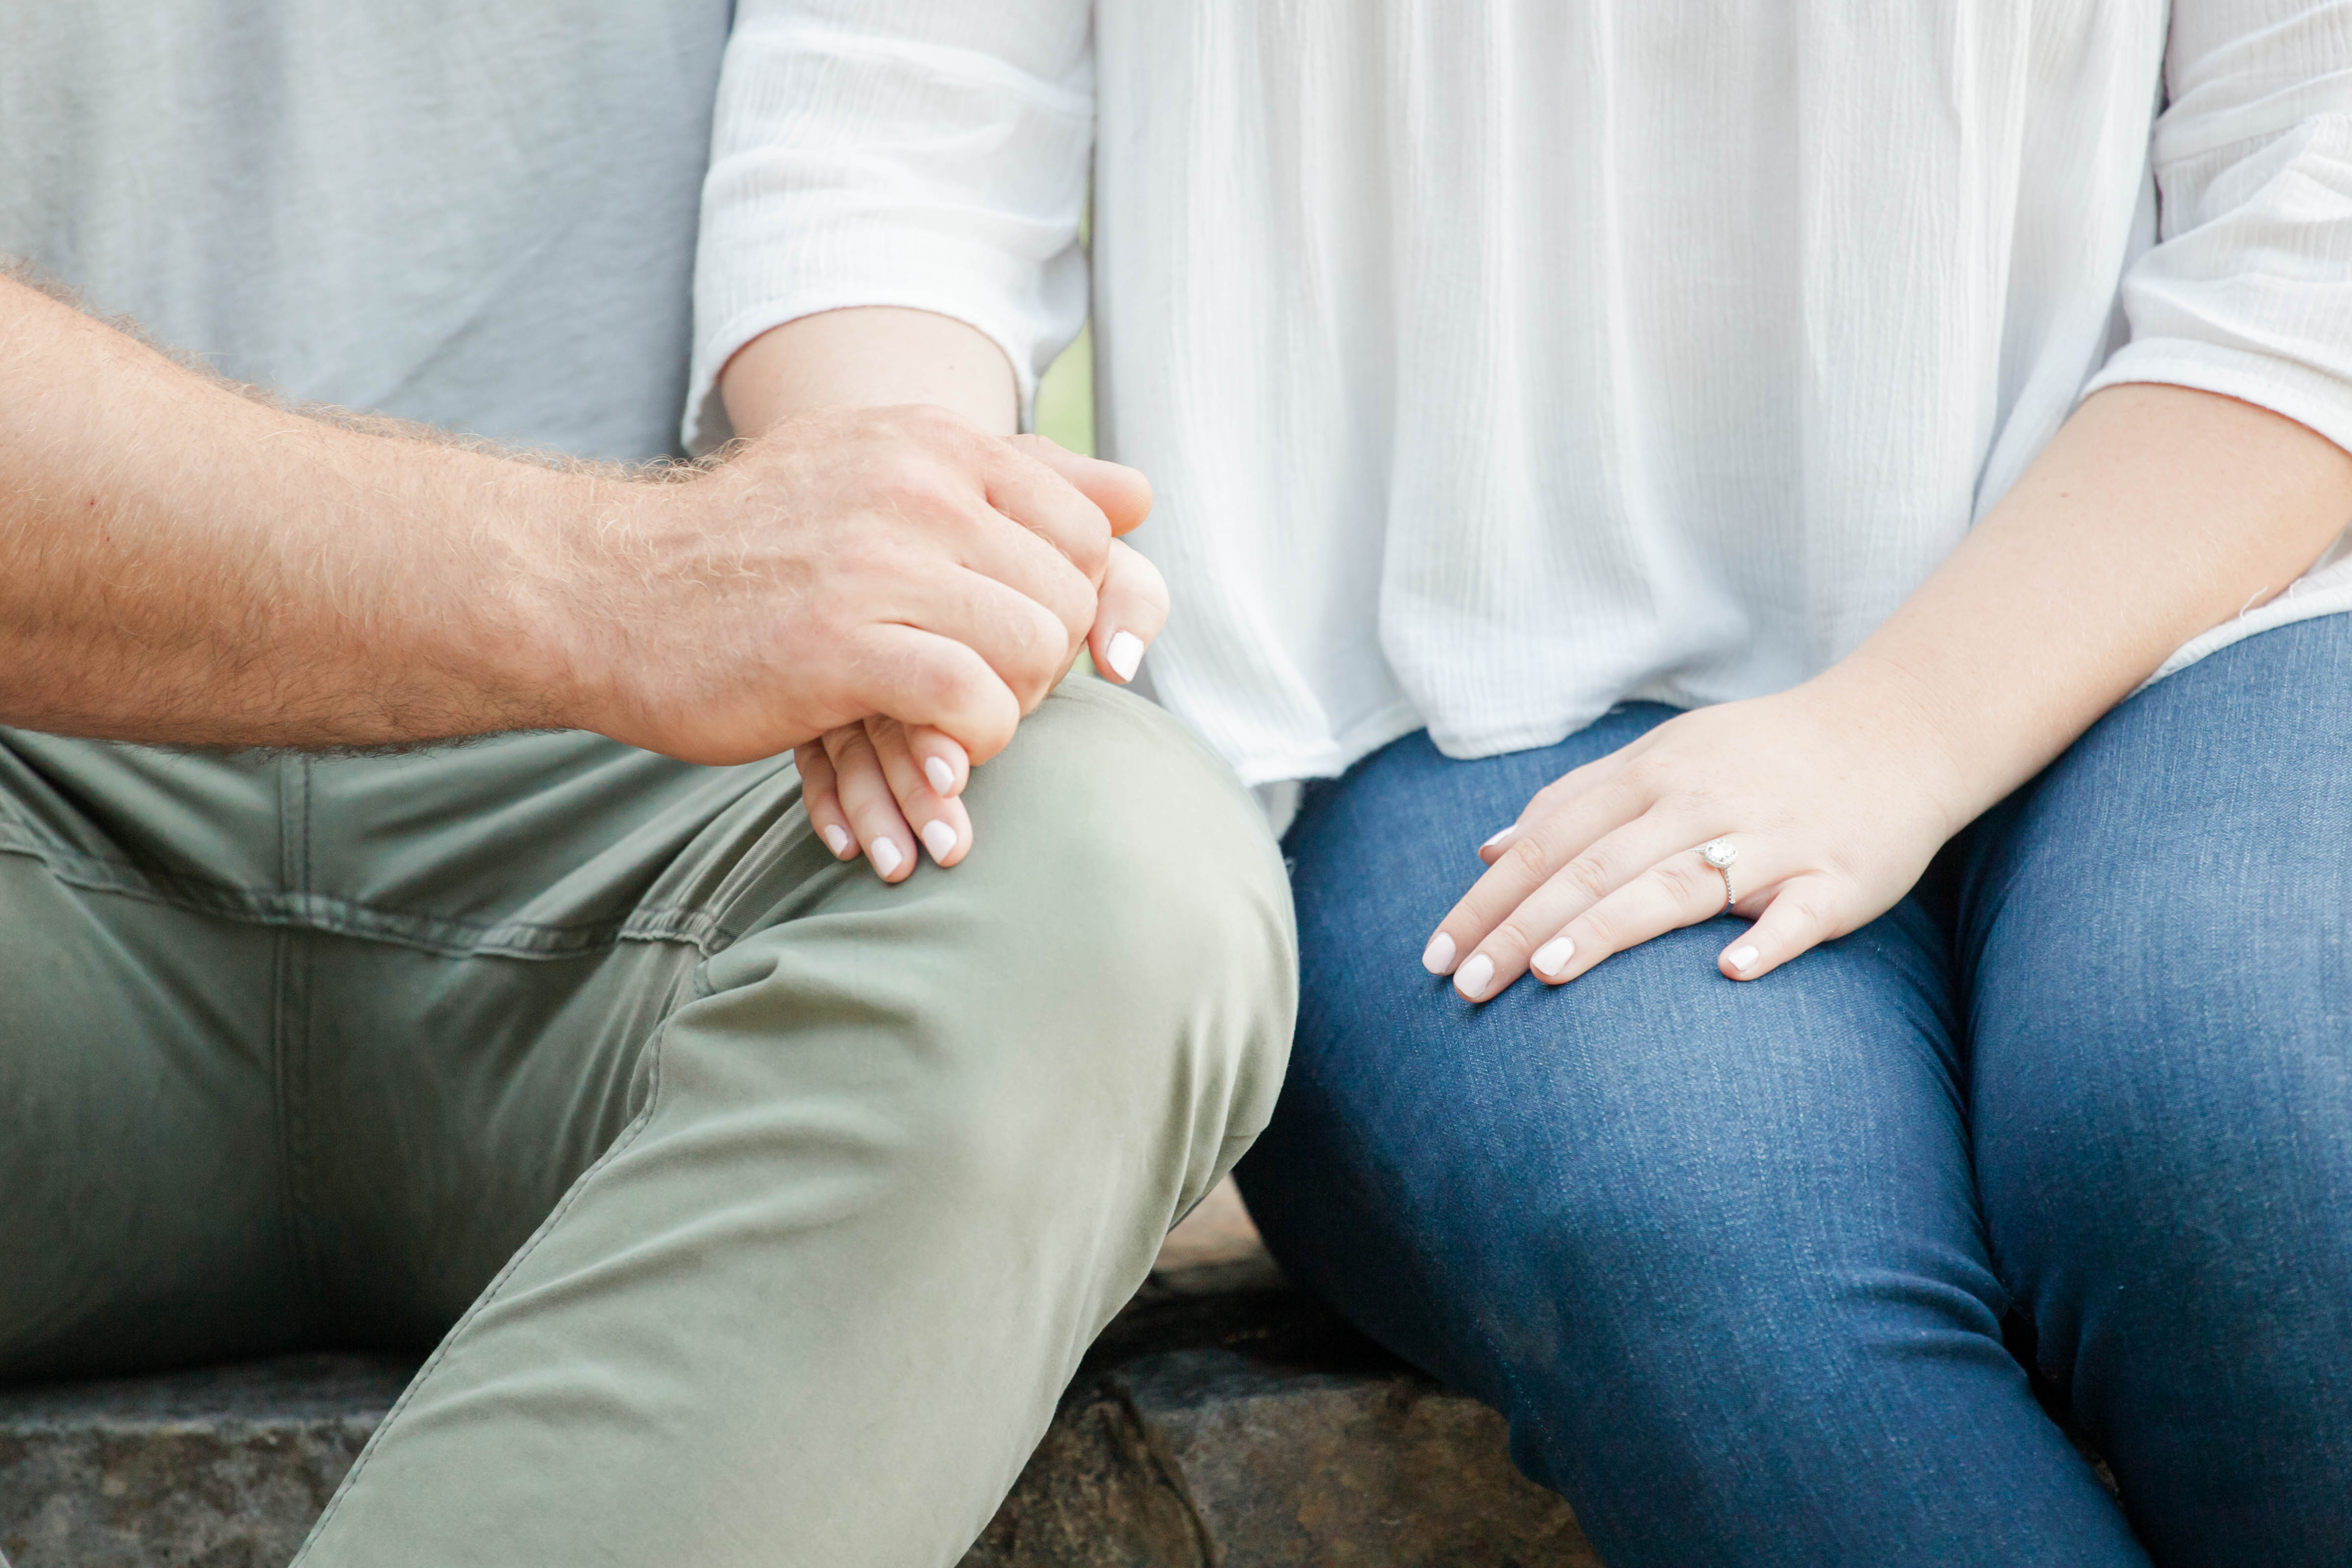 woman in blue jeans and man in green pants holding hands